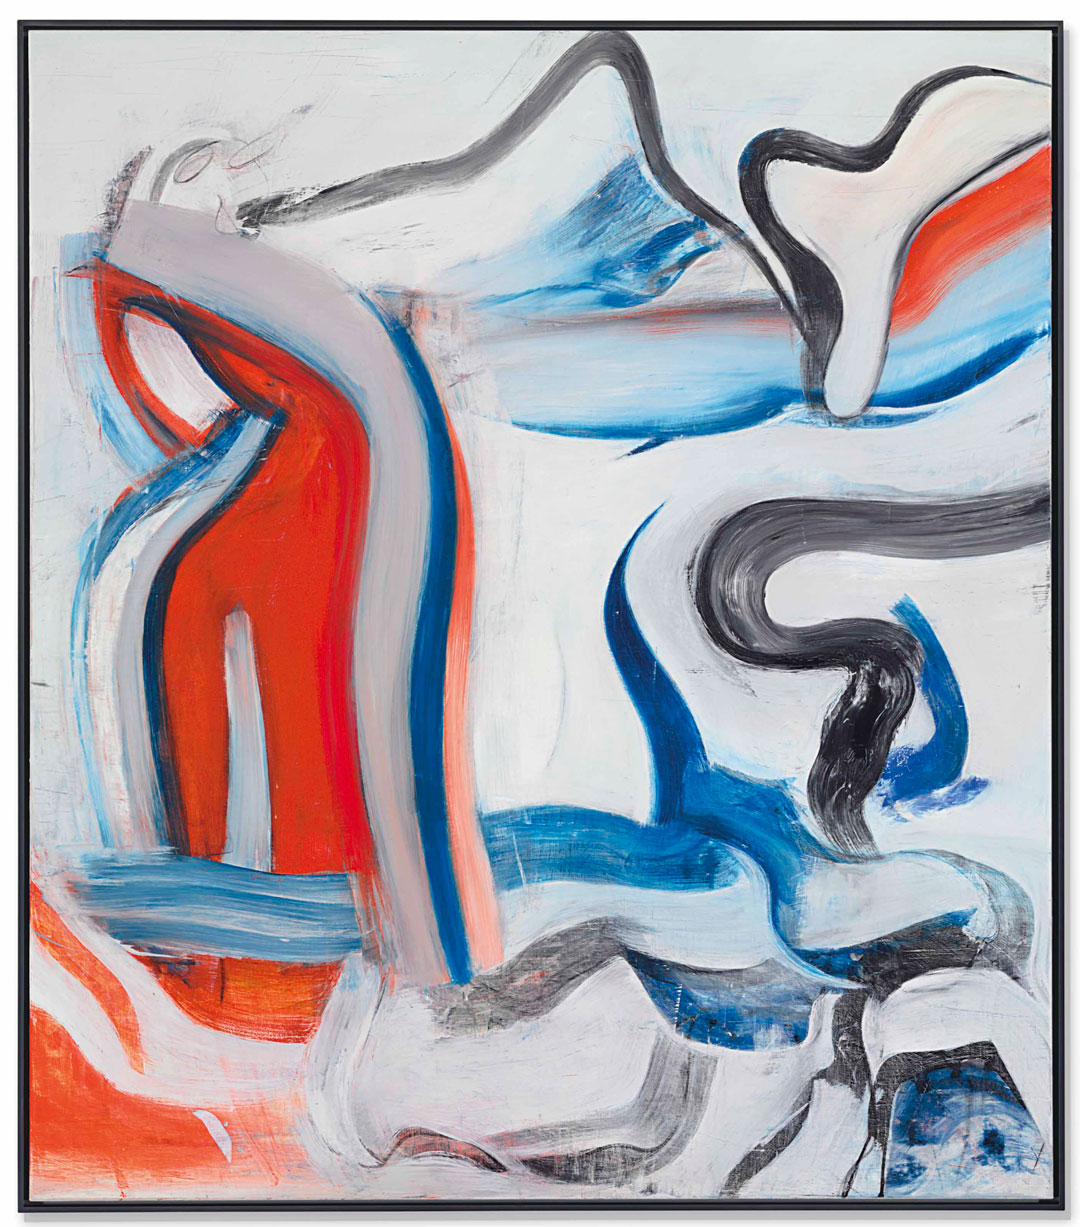 Untitled XIX (1982) by Willem de Kooning. Image courtesy of Christie's